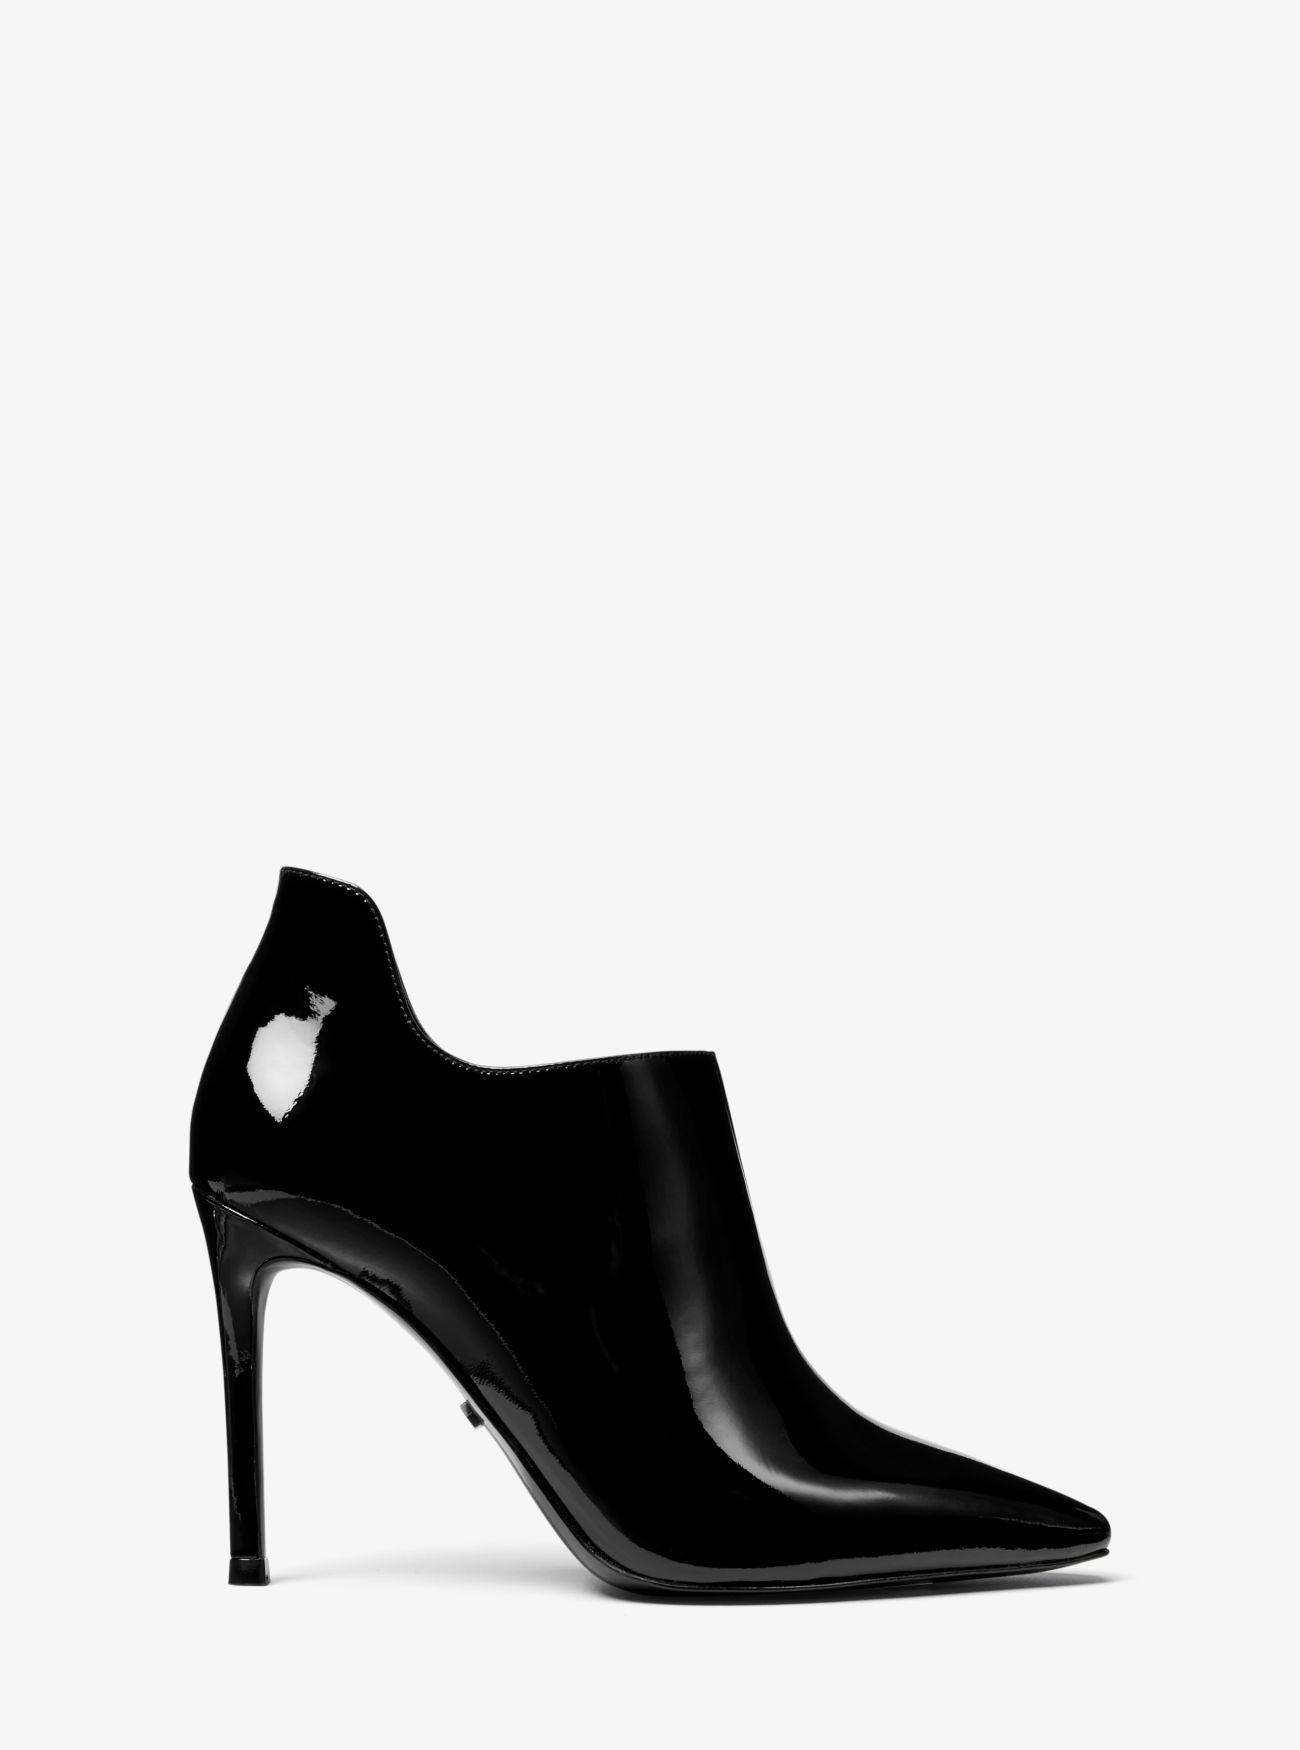 Smelte Ombord Selskab MICHAEL Michael Kors Corrine Patent Leather Bootie in Black - Lyst